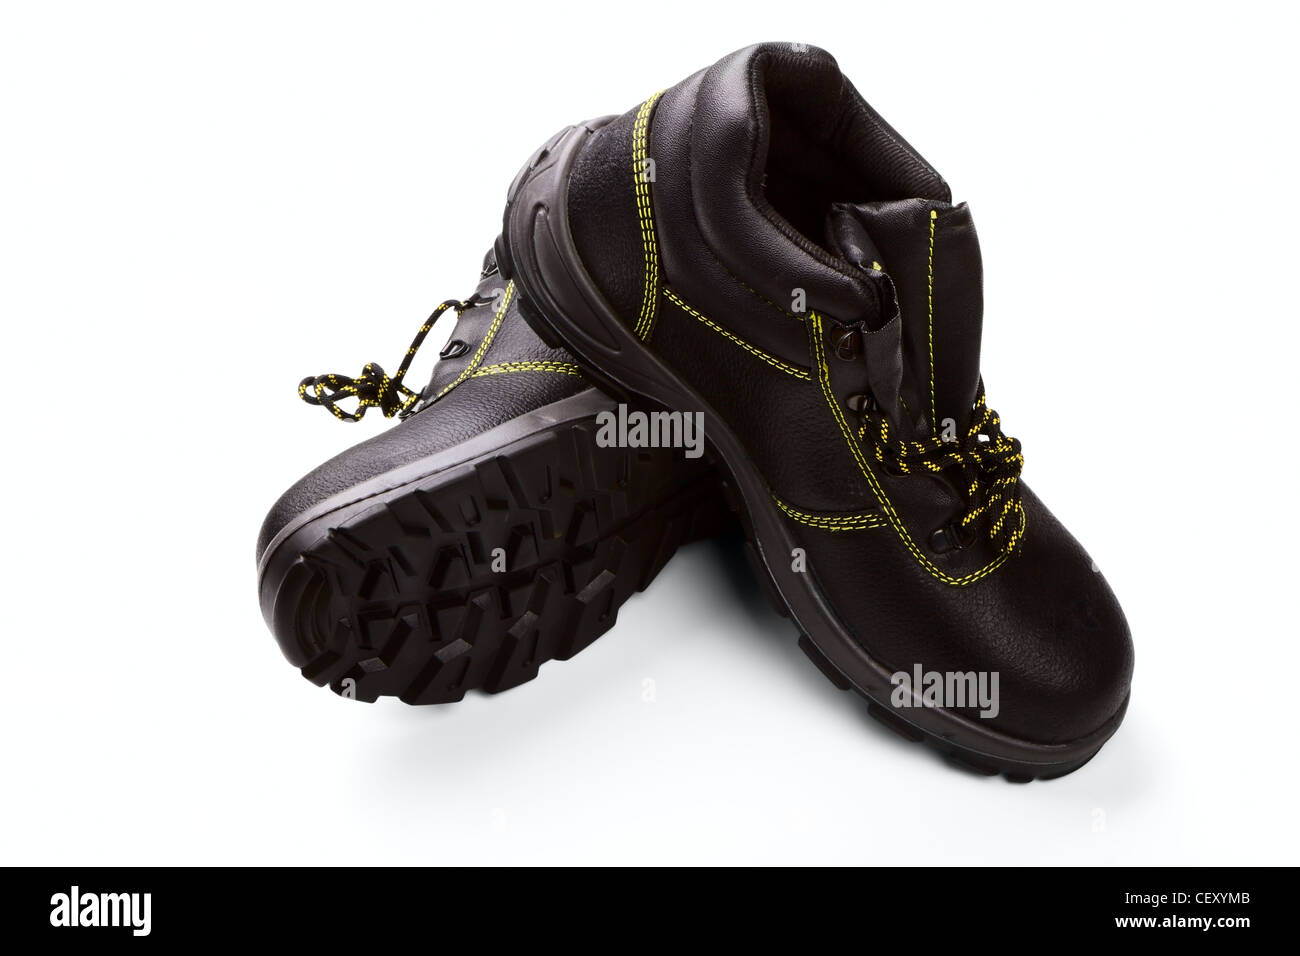 Working boots of black color with a yellow line isolated on a white background Stock Photo